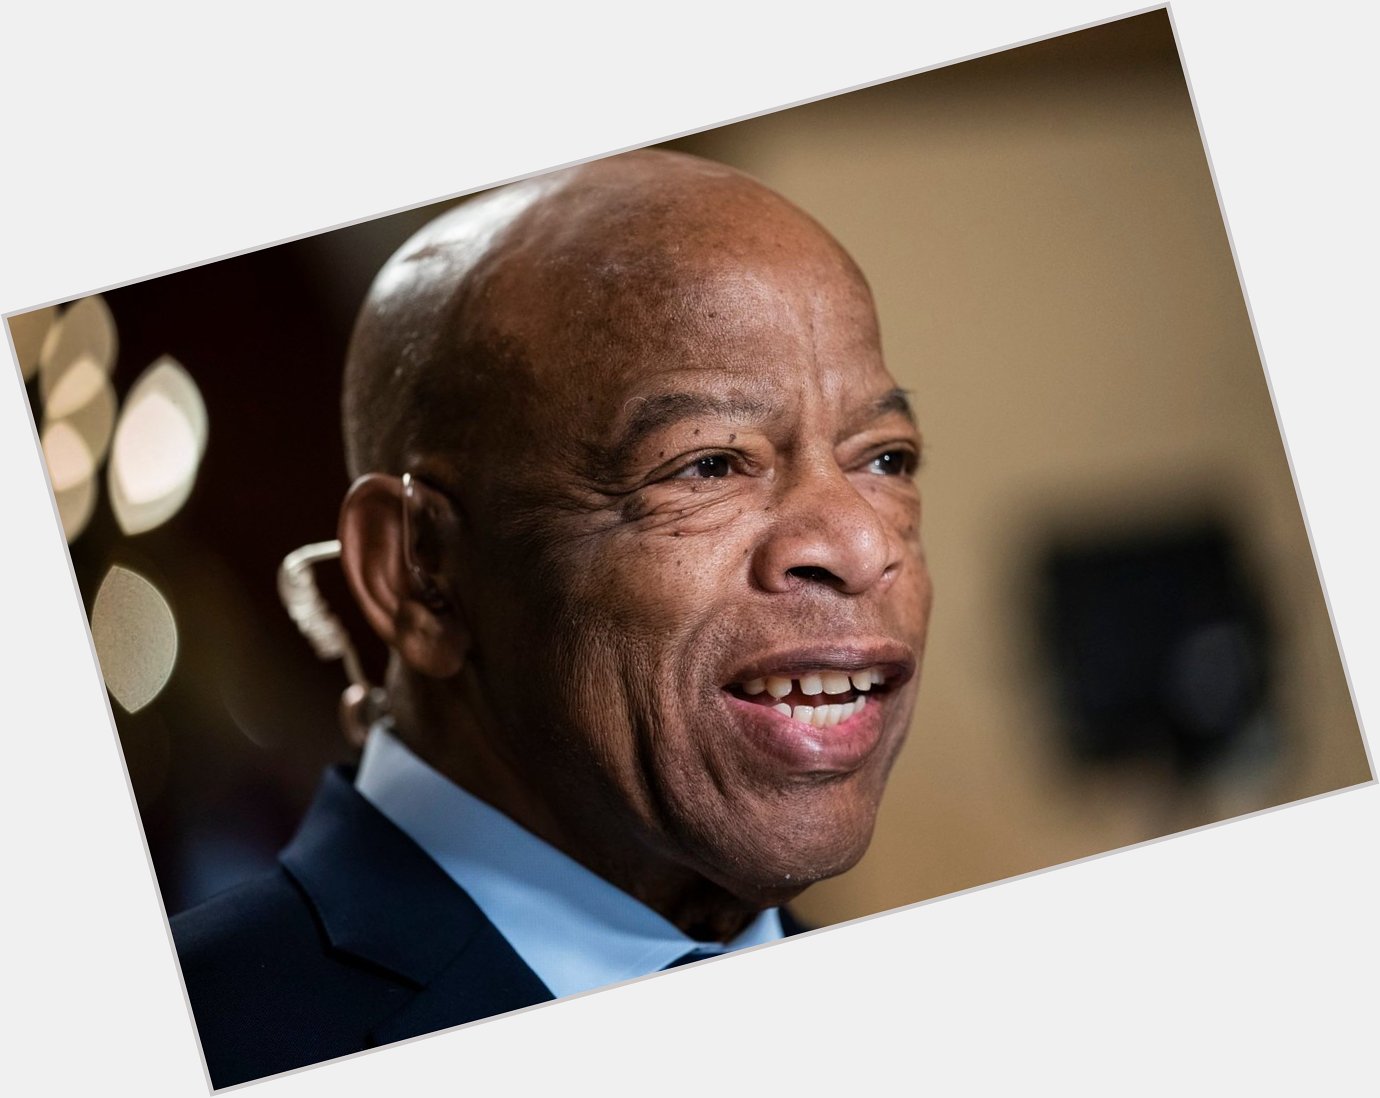 A happy, happy birthday to Rep. John Lewis 80 years young! 